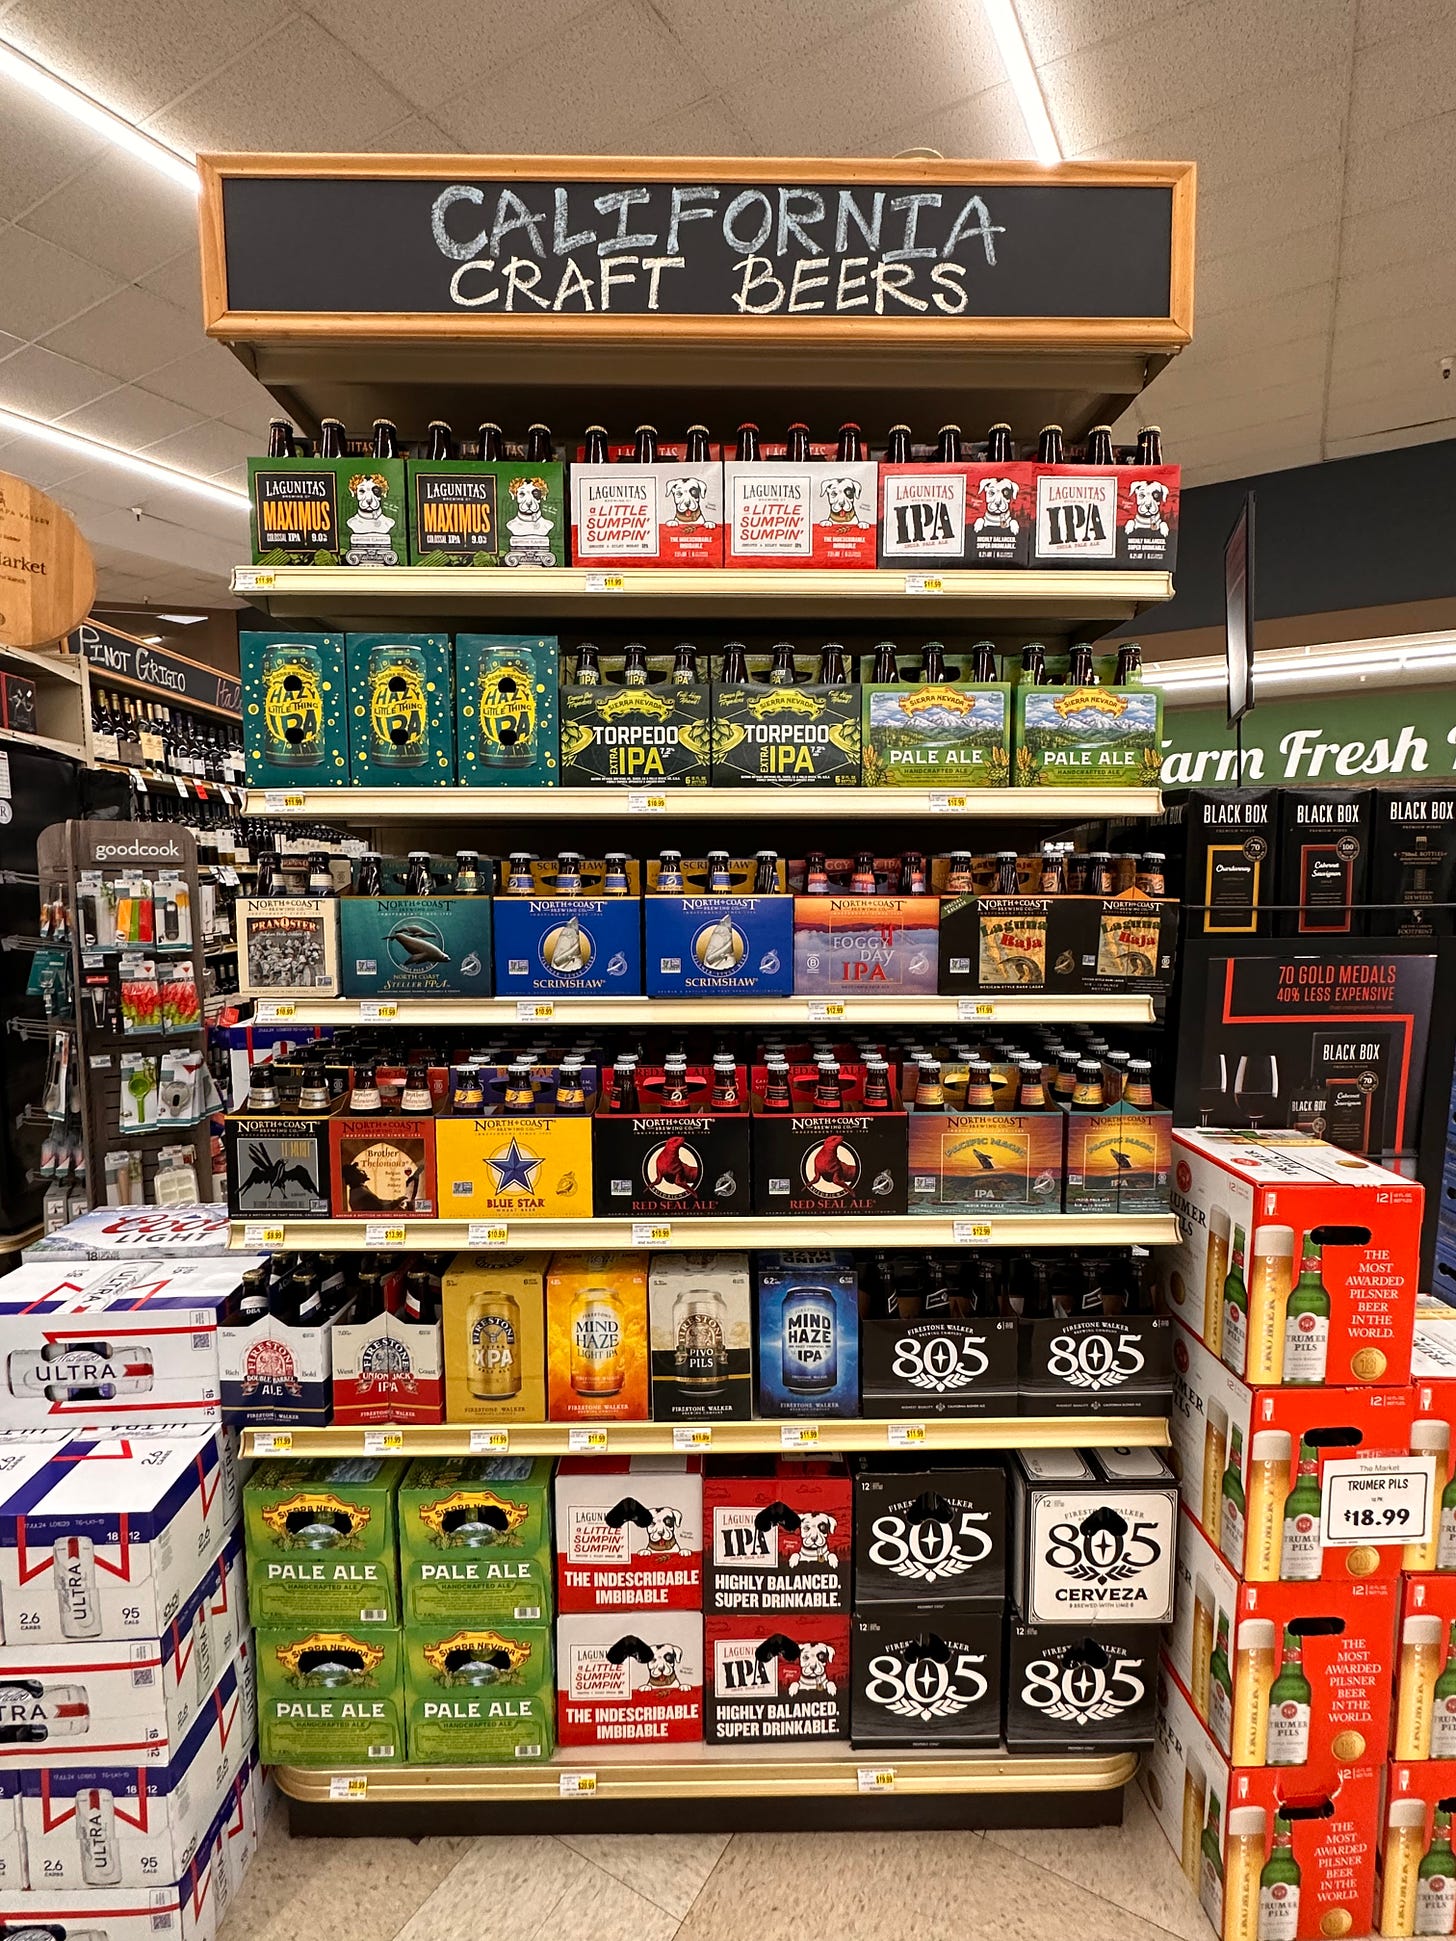 End display in a grocery store of California craft beers. Mostly bottles with some cans , six packs and 12 packs